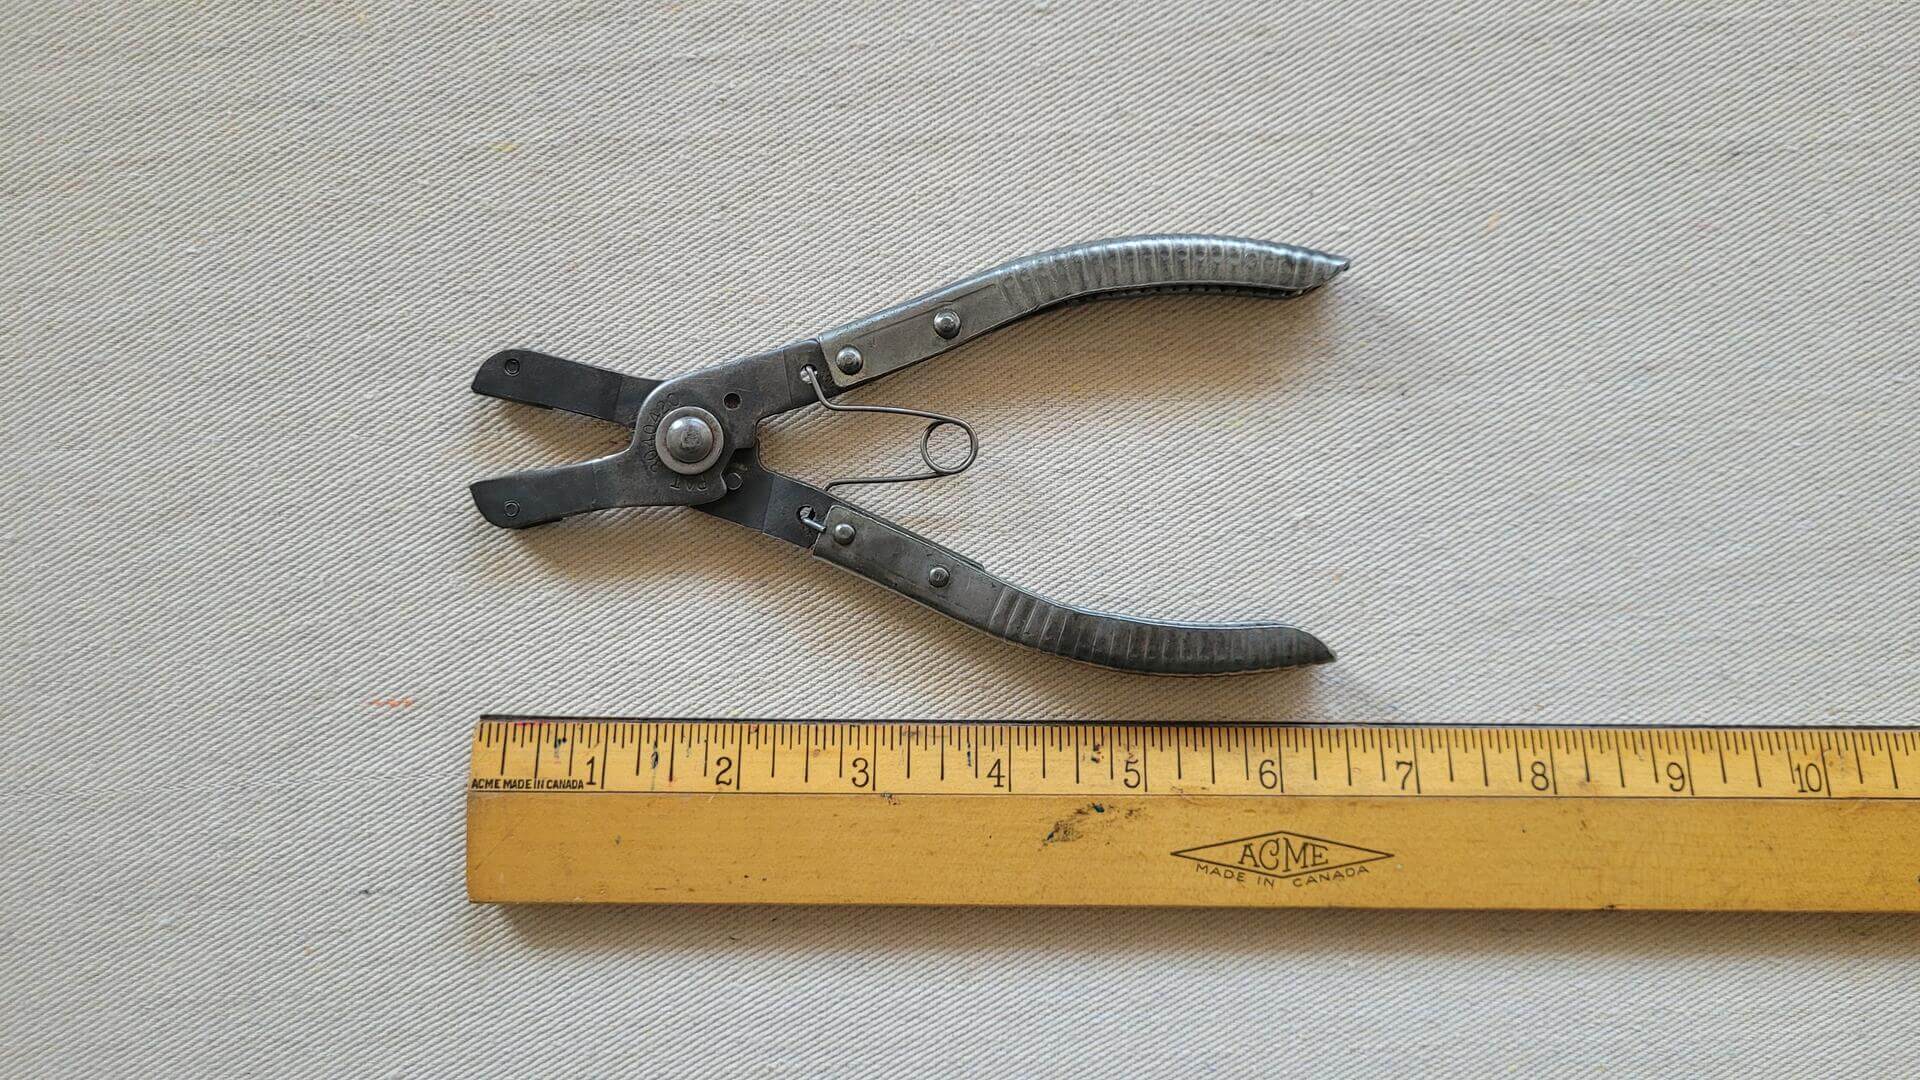 Vintage K-D Tools No. 445 & No. 446 retaining snap ring automotive pliers. Antique 1960s made in USA collectible mechanic hand tools Patent 3040420